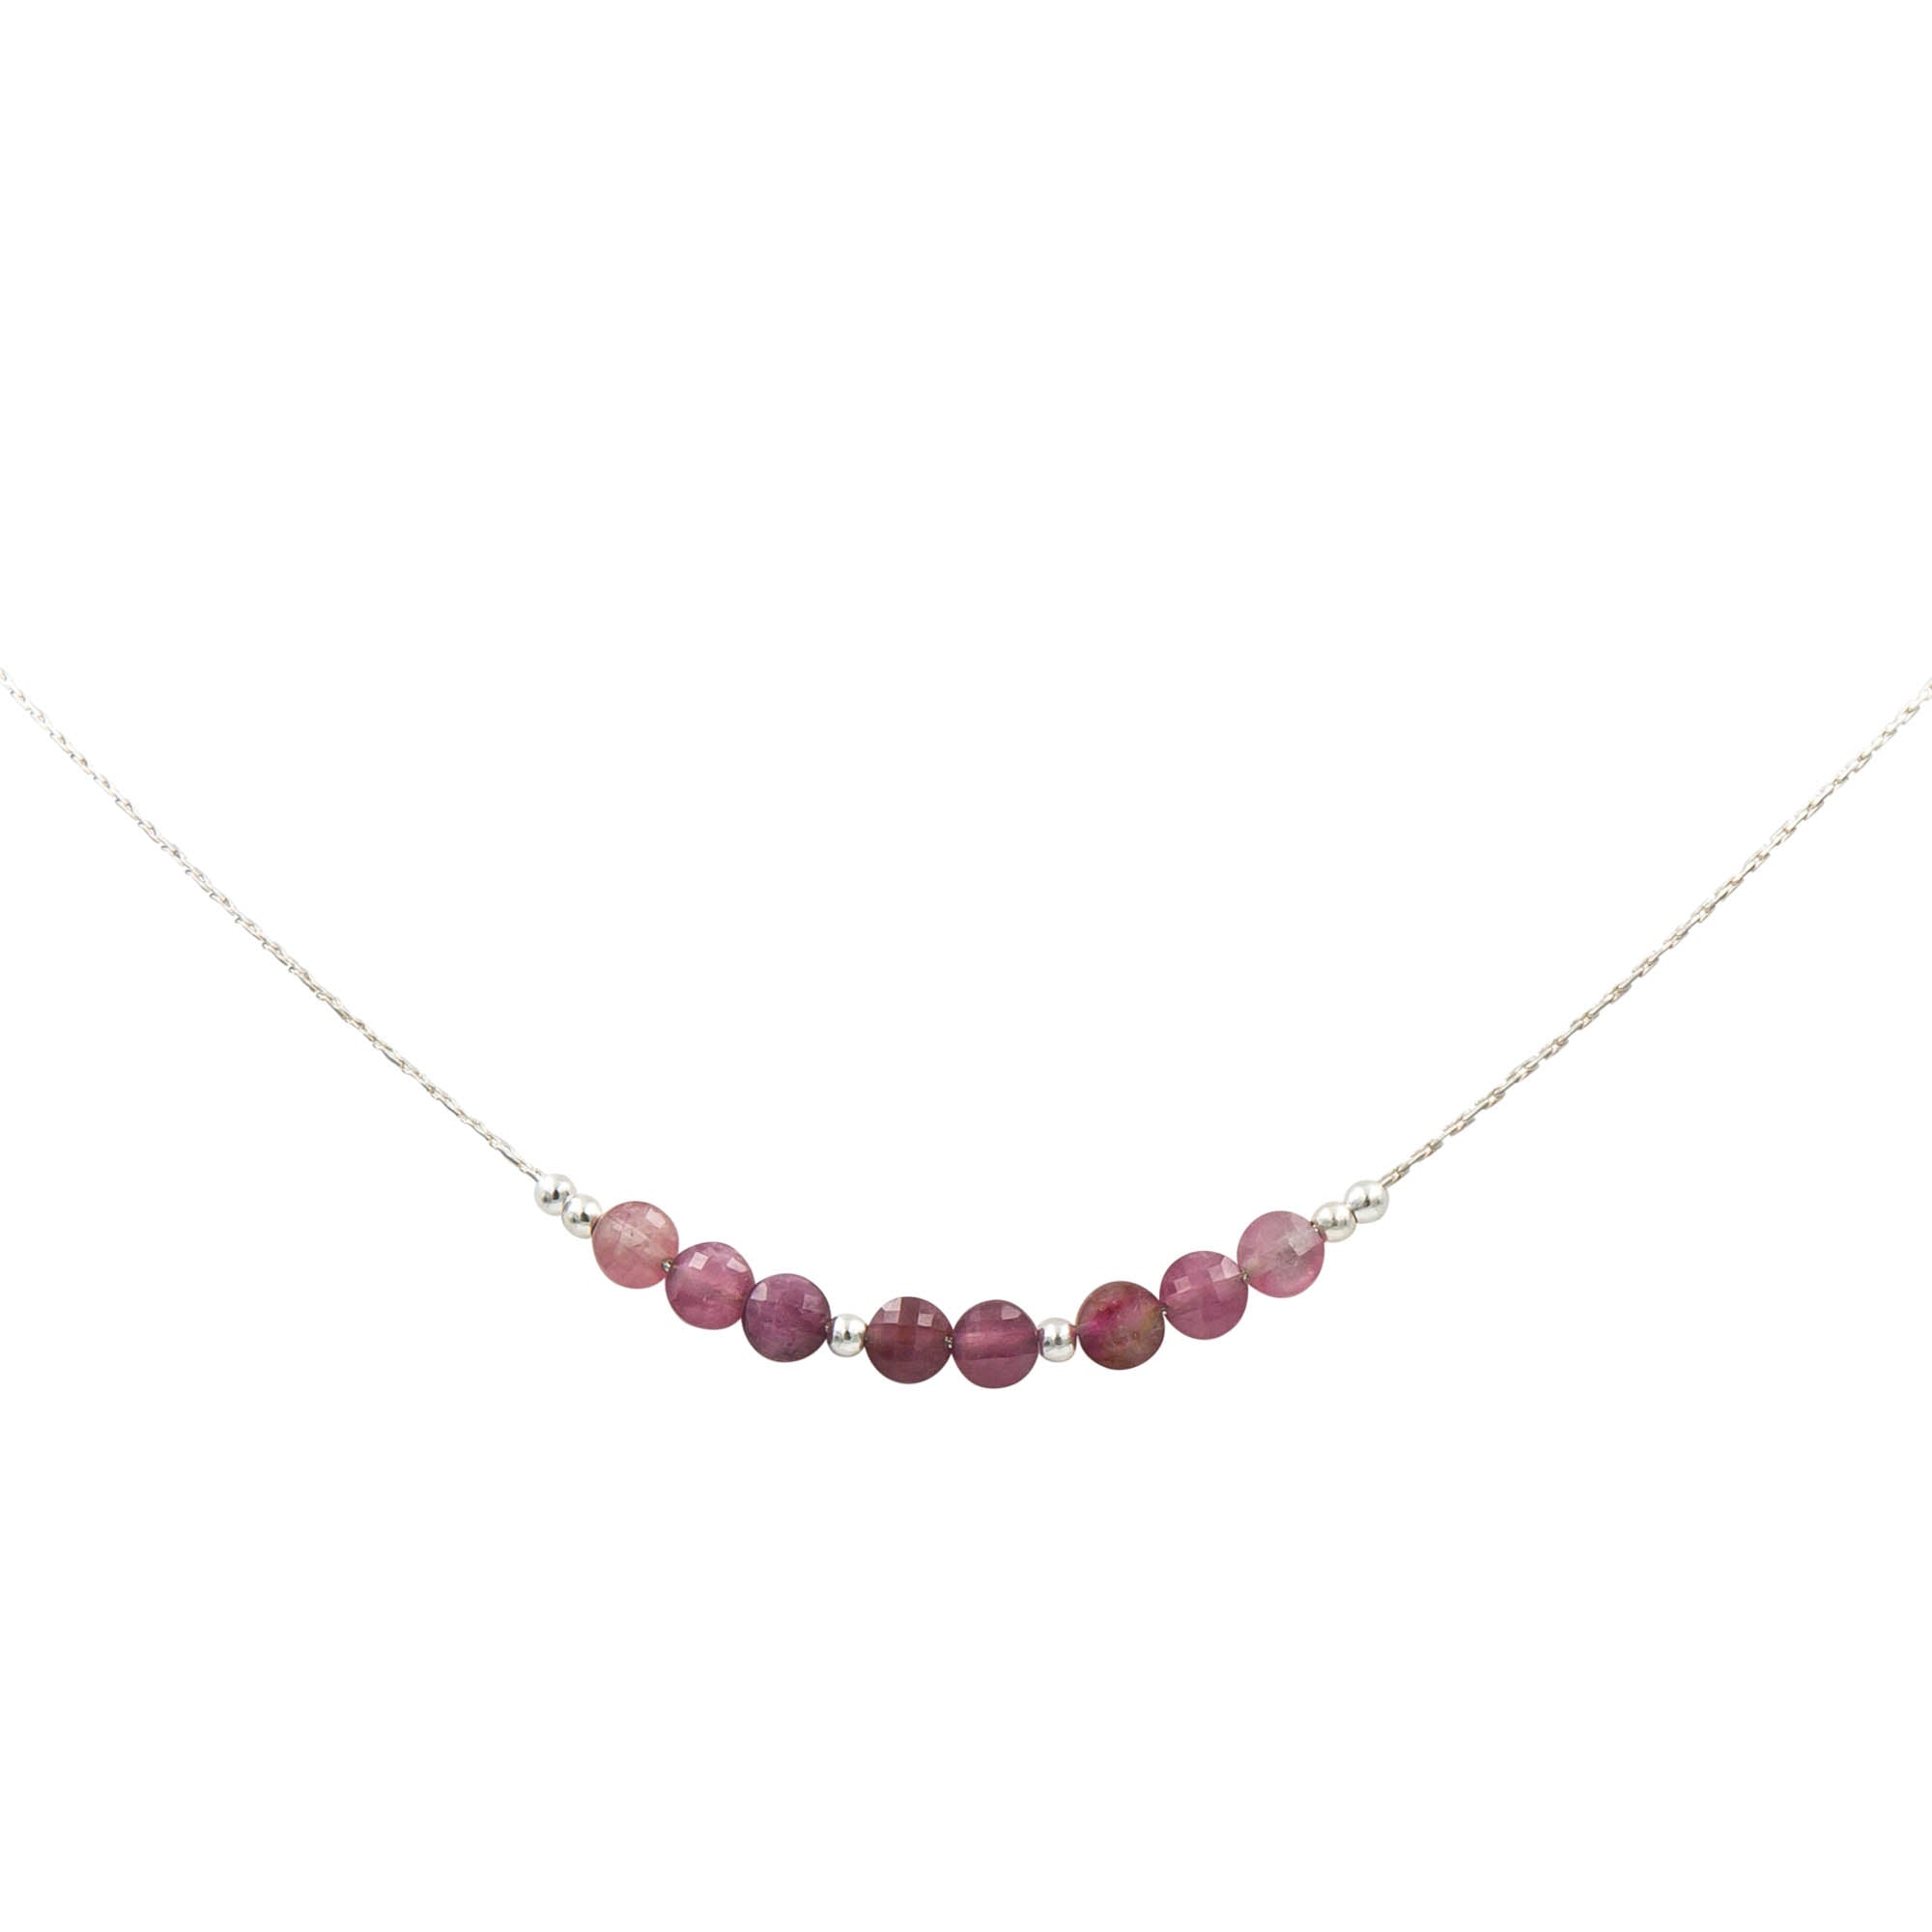 Earth Song Jewelry ~ Pink Tourmaline Natural Stone ~ Sterling Silver Handmade Necklace